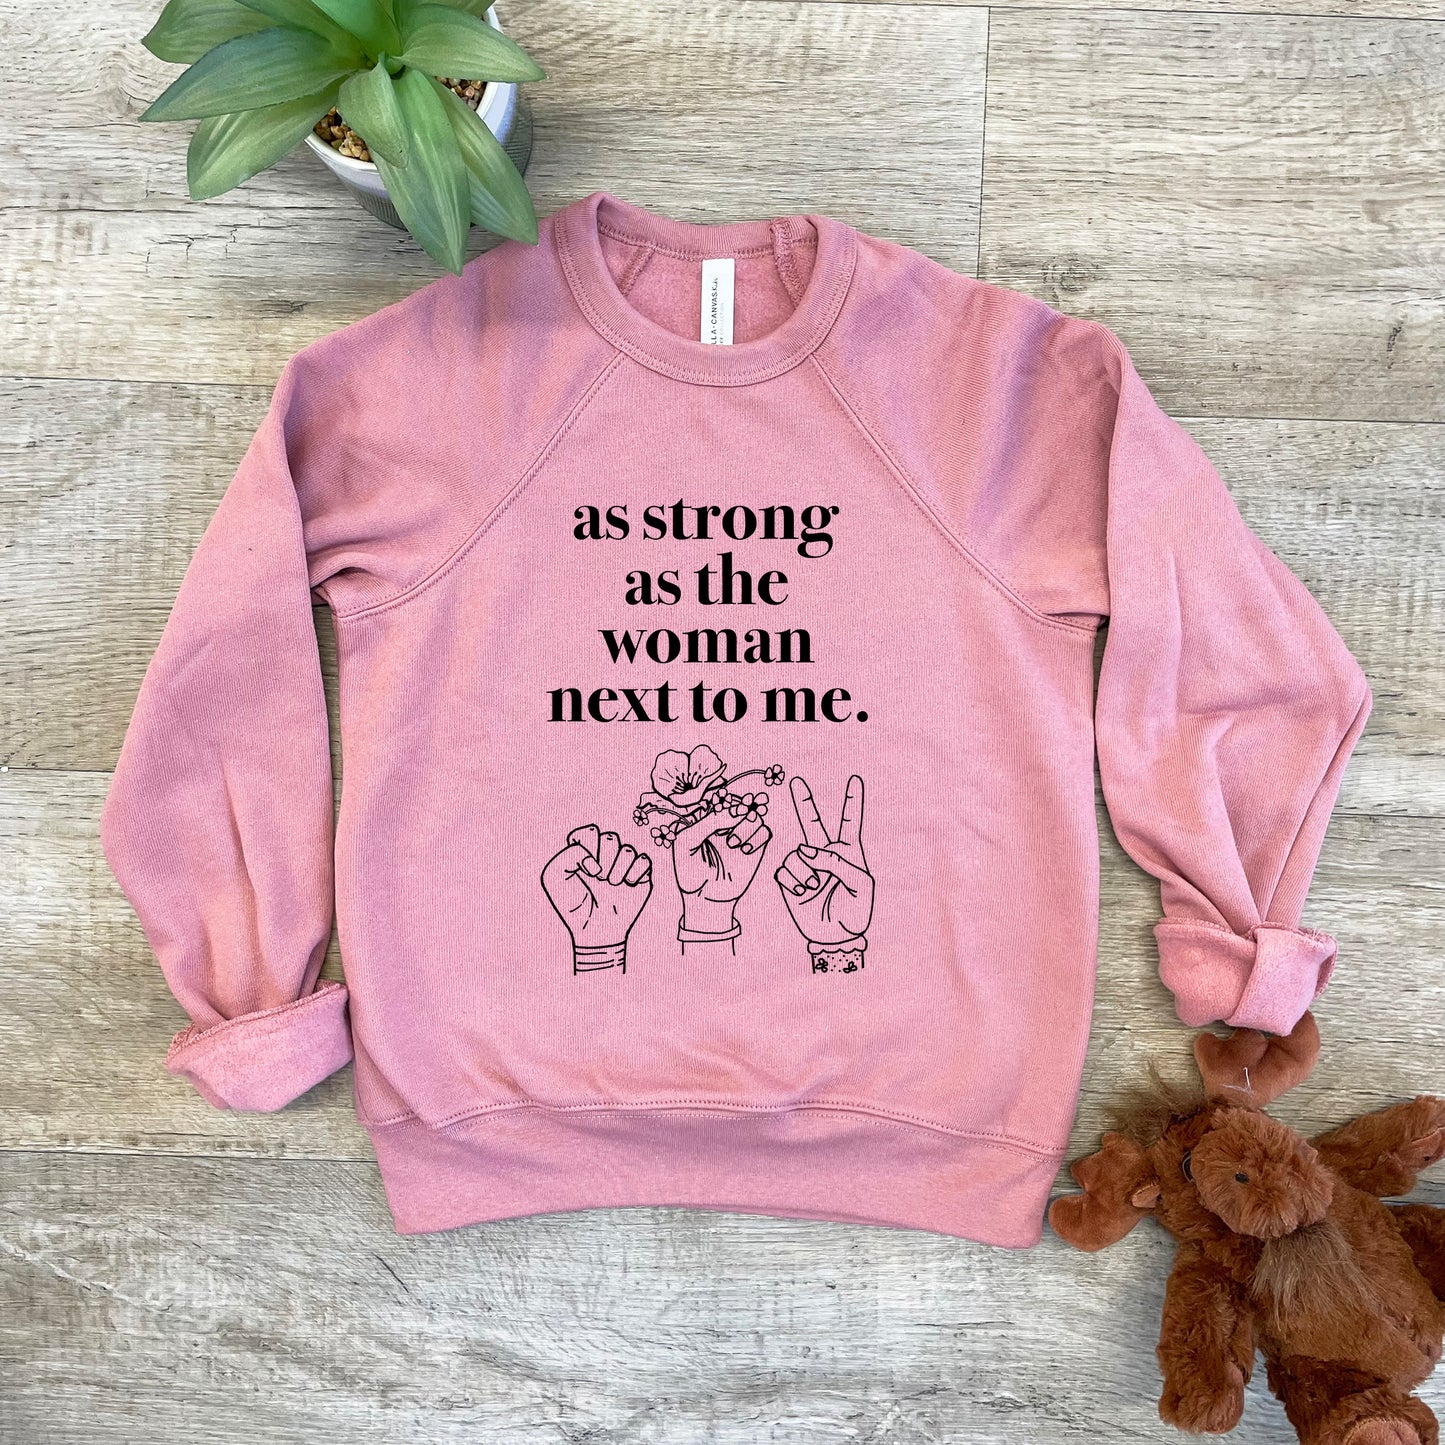 As Strong As The Woman Next To Me - Kid's Sweatshirt - Heather Gray or Mauve